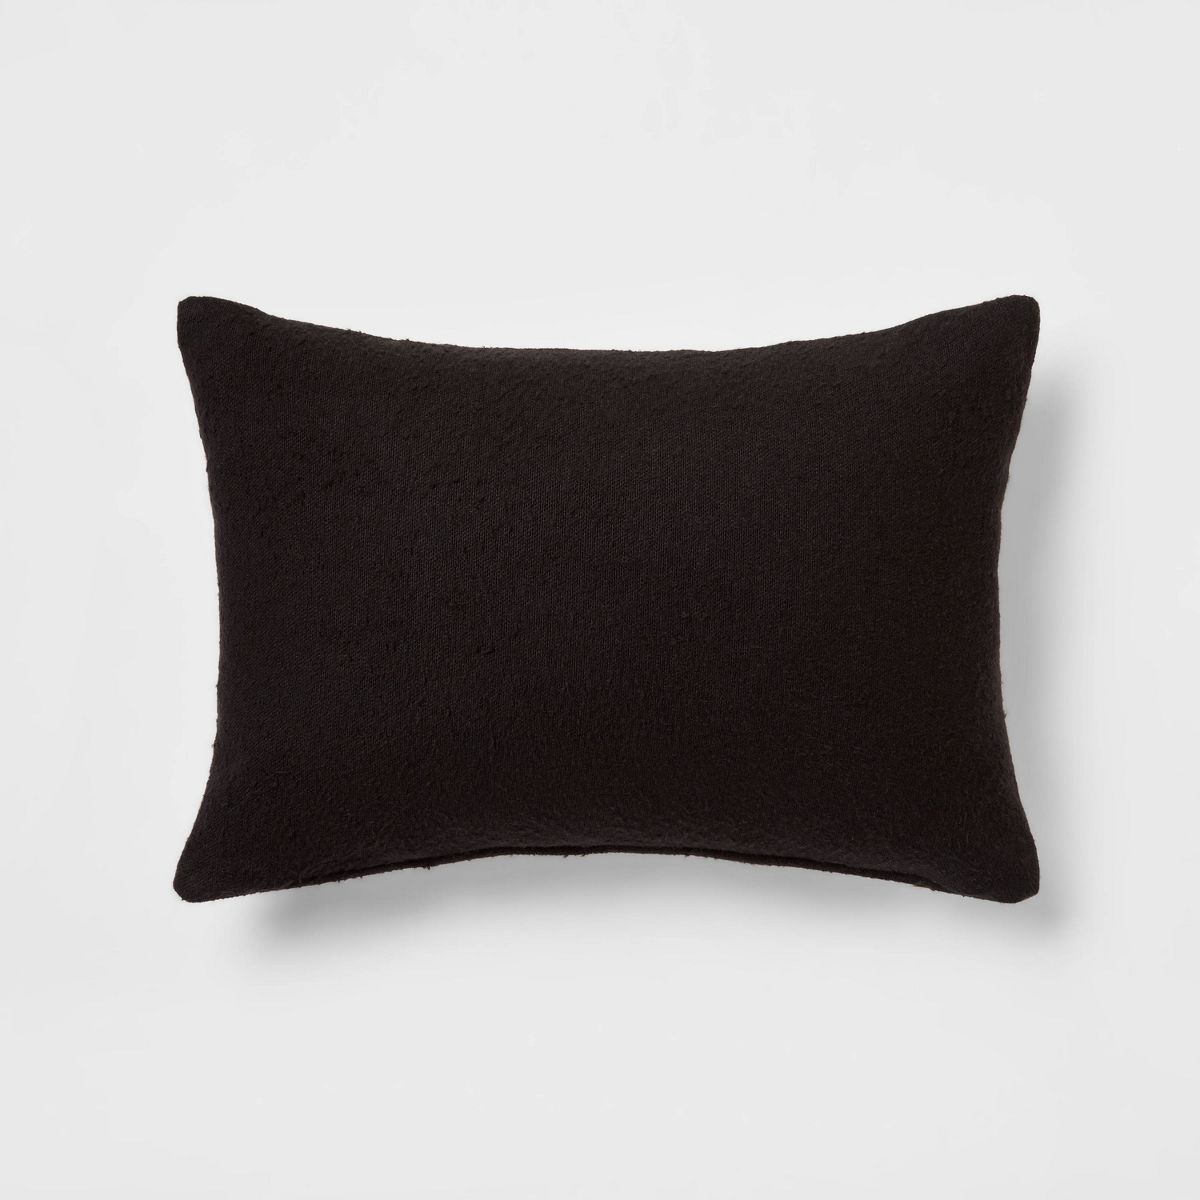 Oblong Boucle Color Blocked Decorative Throw Pillow Black - Threshold™ | Target